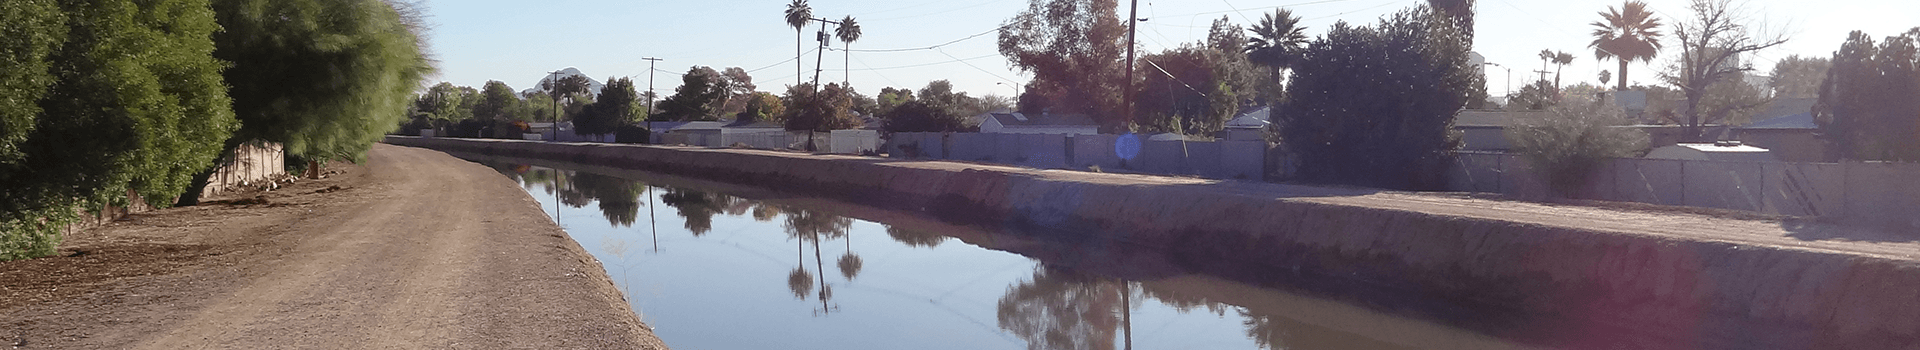 Phoenix Wins $10.3 Million Grant to Expand Development of Grand Canal Path